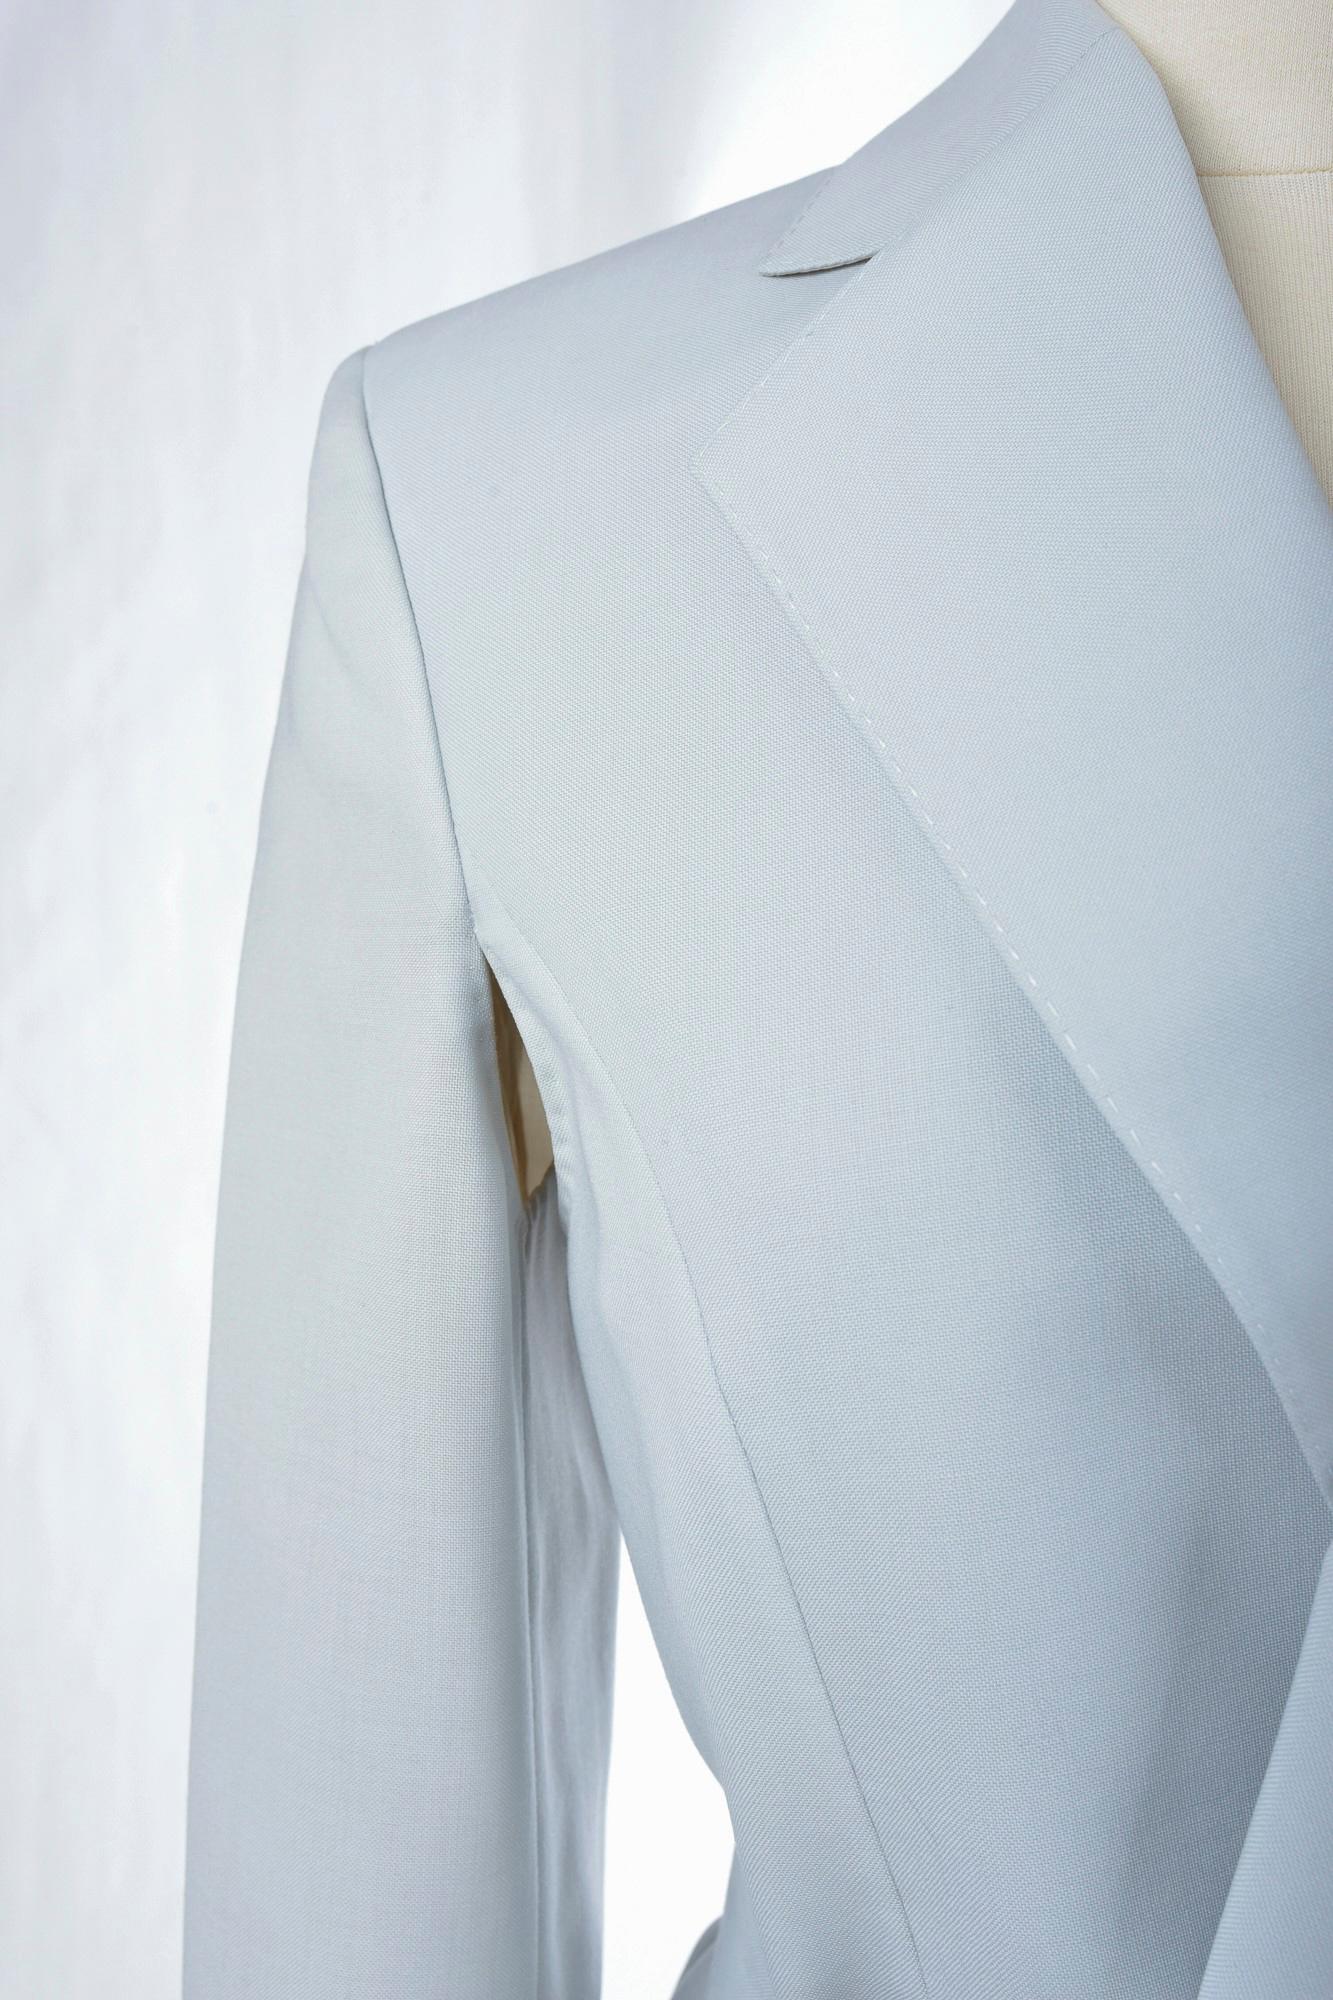 An Ice blue Tuxedo Pant Suit by Gianfranco Ferre - Italy Circa 1995 - 2000 For Sale 1